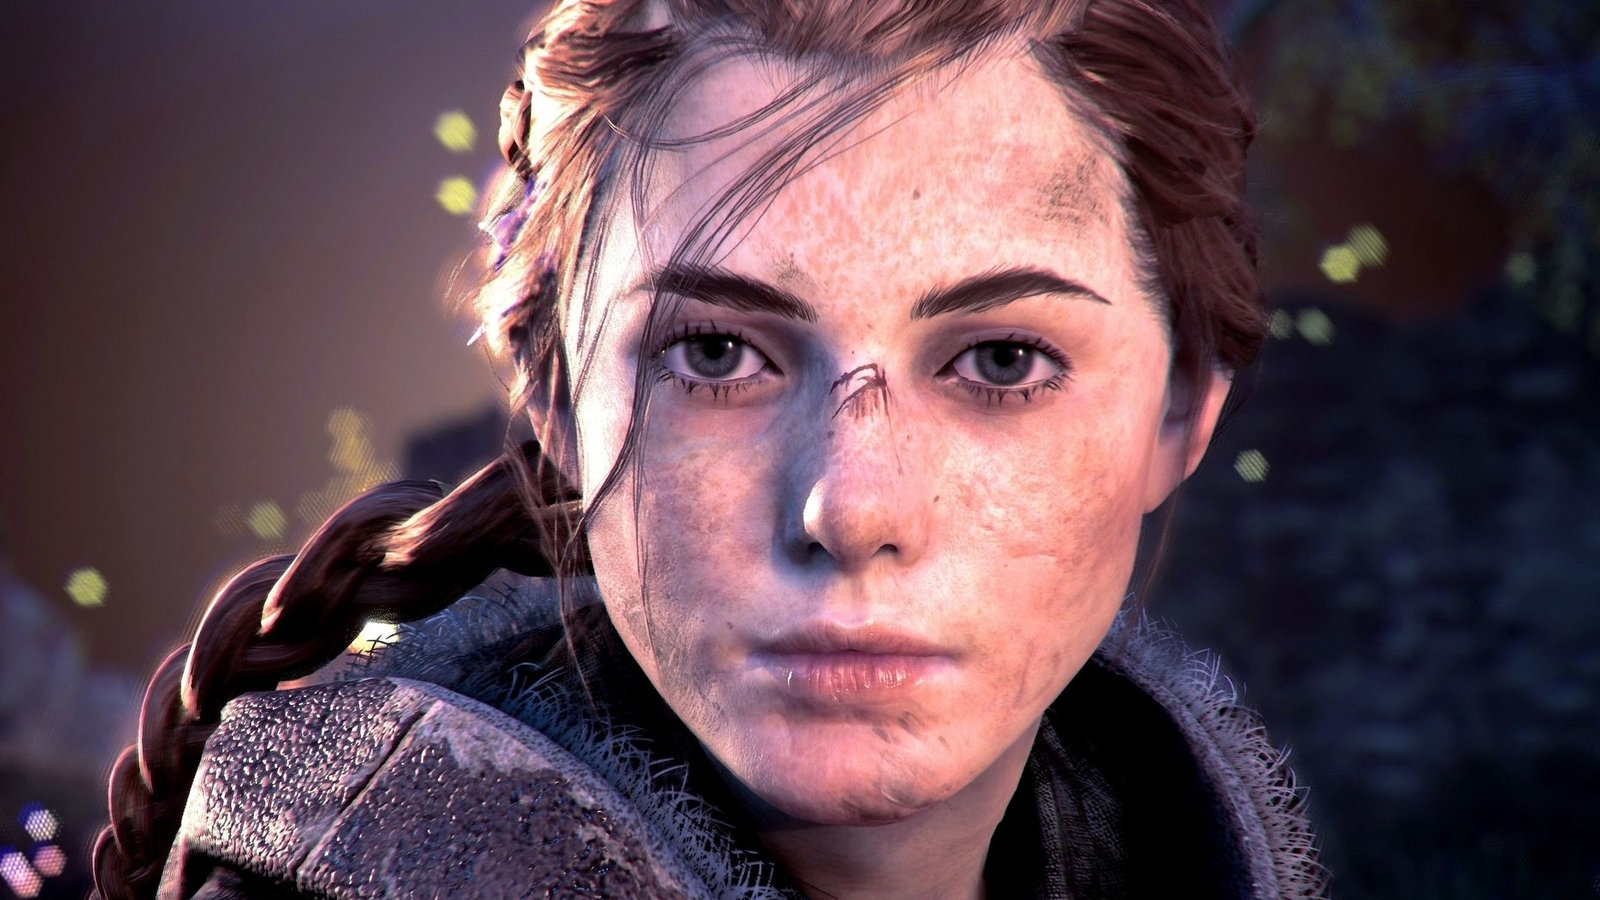 A Plague Tale: Innocence's 60fps upgrade tested - and there's a bonus for  Xbox Series owners